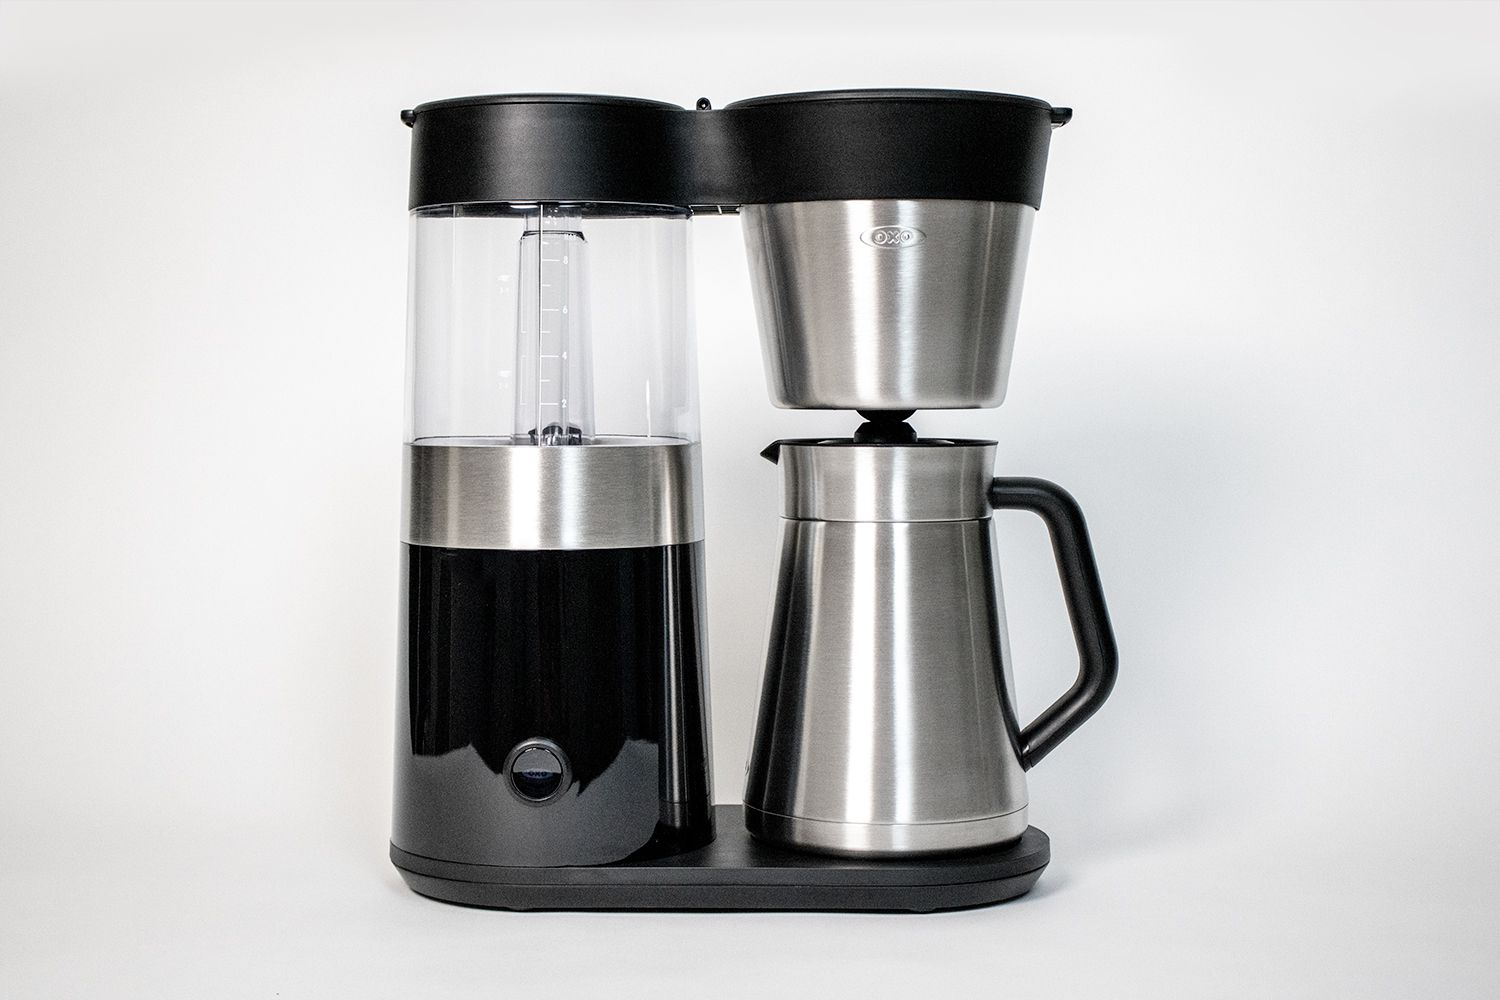 The OXO 9-Cup Coffee Maker